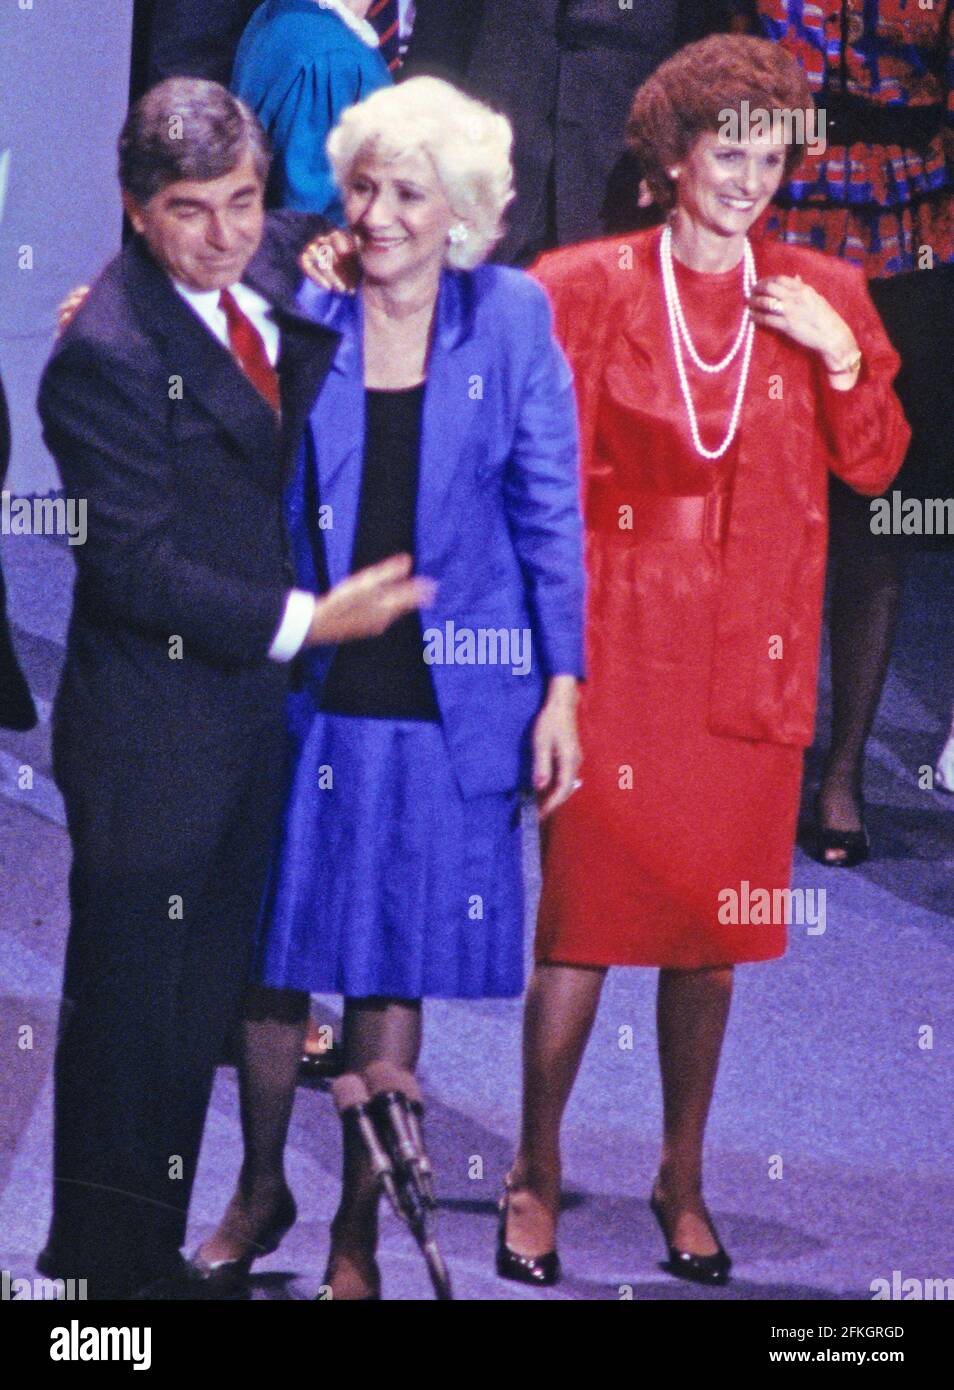 Oscar Award-winning actress Olympia Dukakis, appears with her cousin, Governor Michael Dukakis (Democrat of Massachusetts), the 1988 Democratic Party nominee for President of the United States, at the 1988 Democratic National Convention in the Omni Coliseum in Atlanta, Georgia on July 21, 1988.  Kitty Dukakis is a right in the red dress. Credit: Arnie Sachs / CNP / MediaPunch Stock Photo